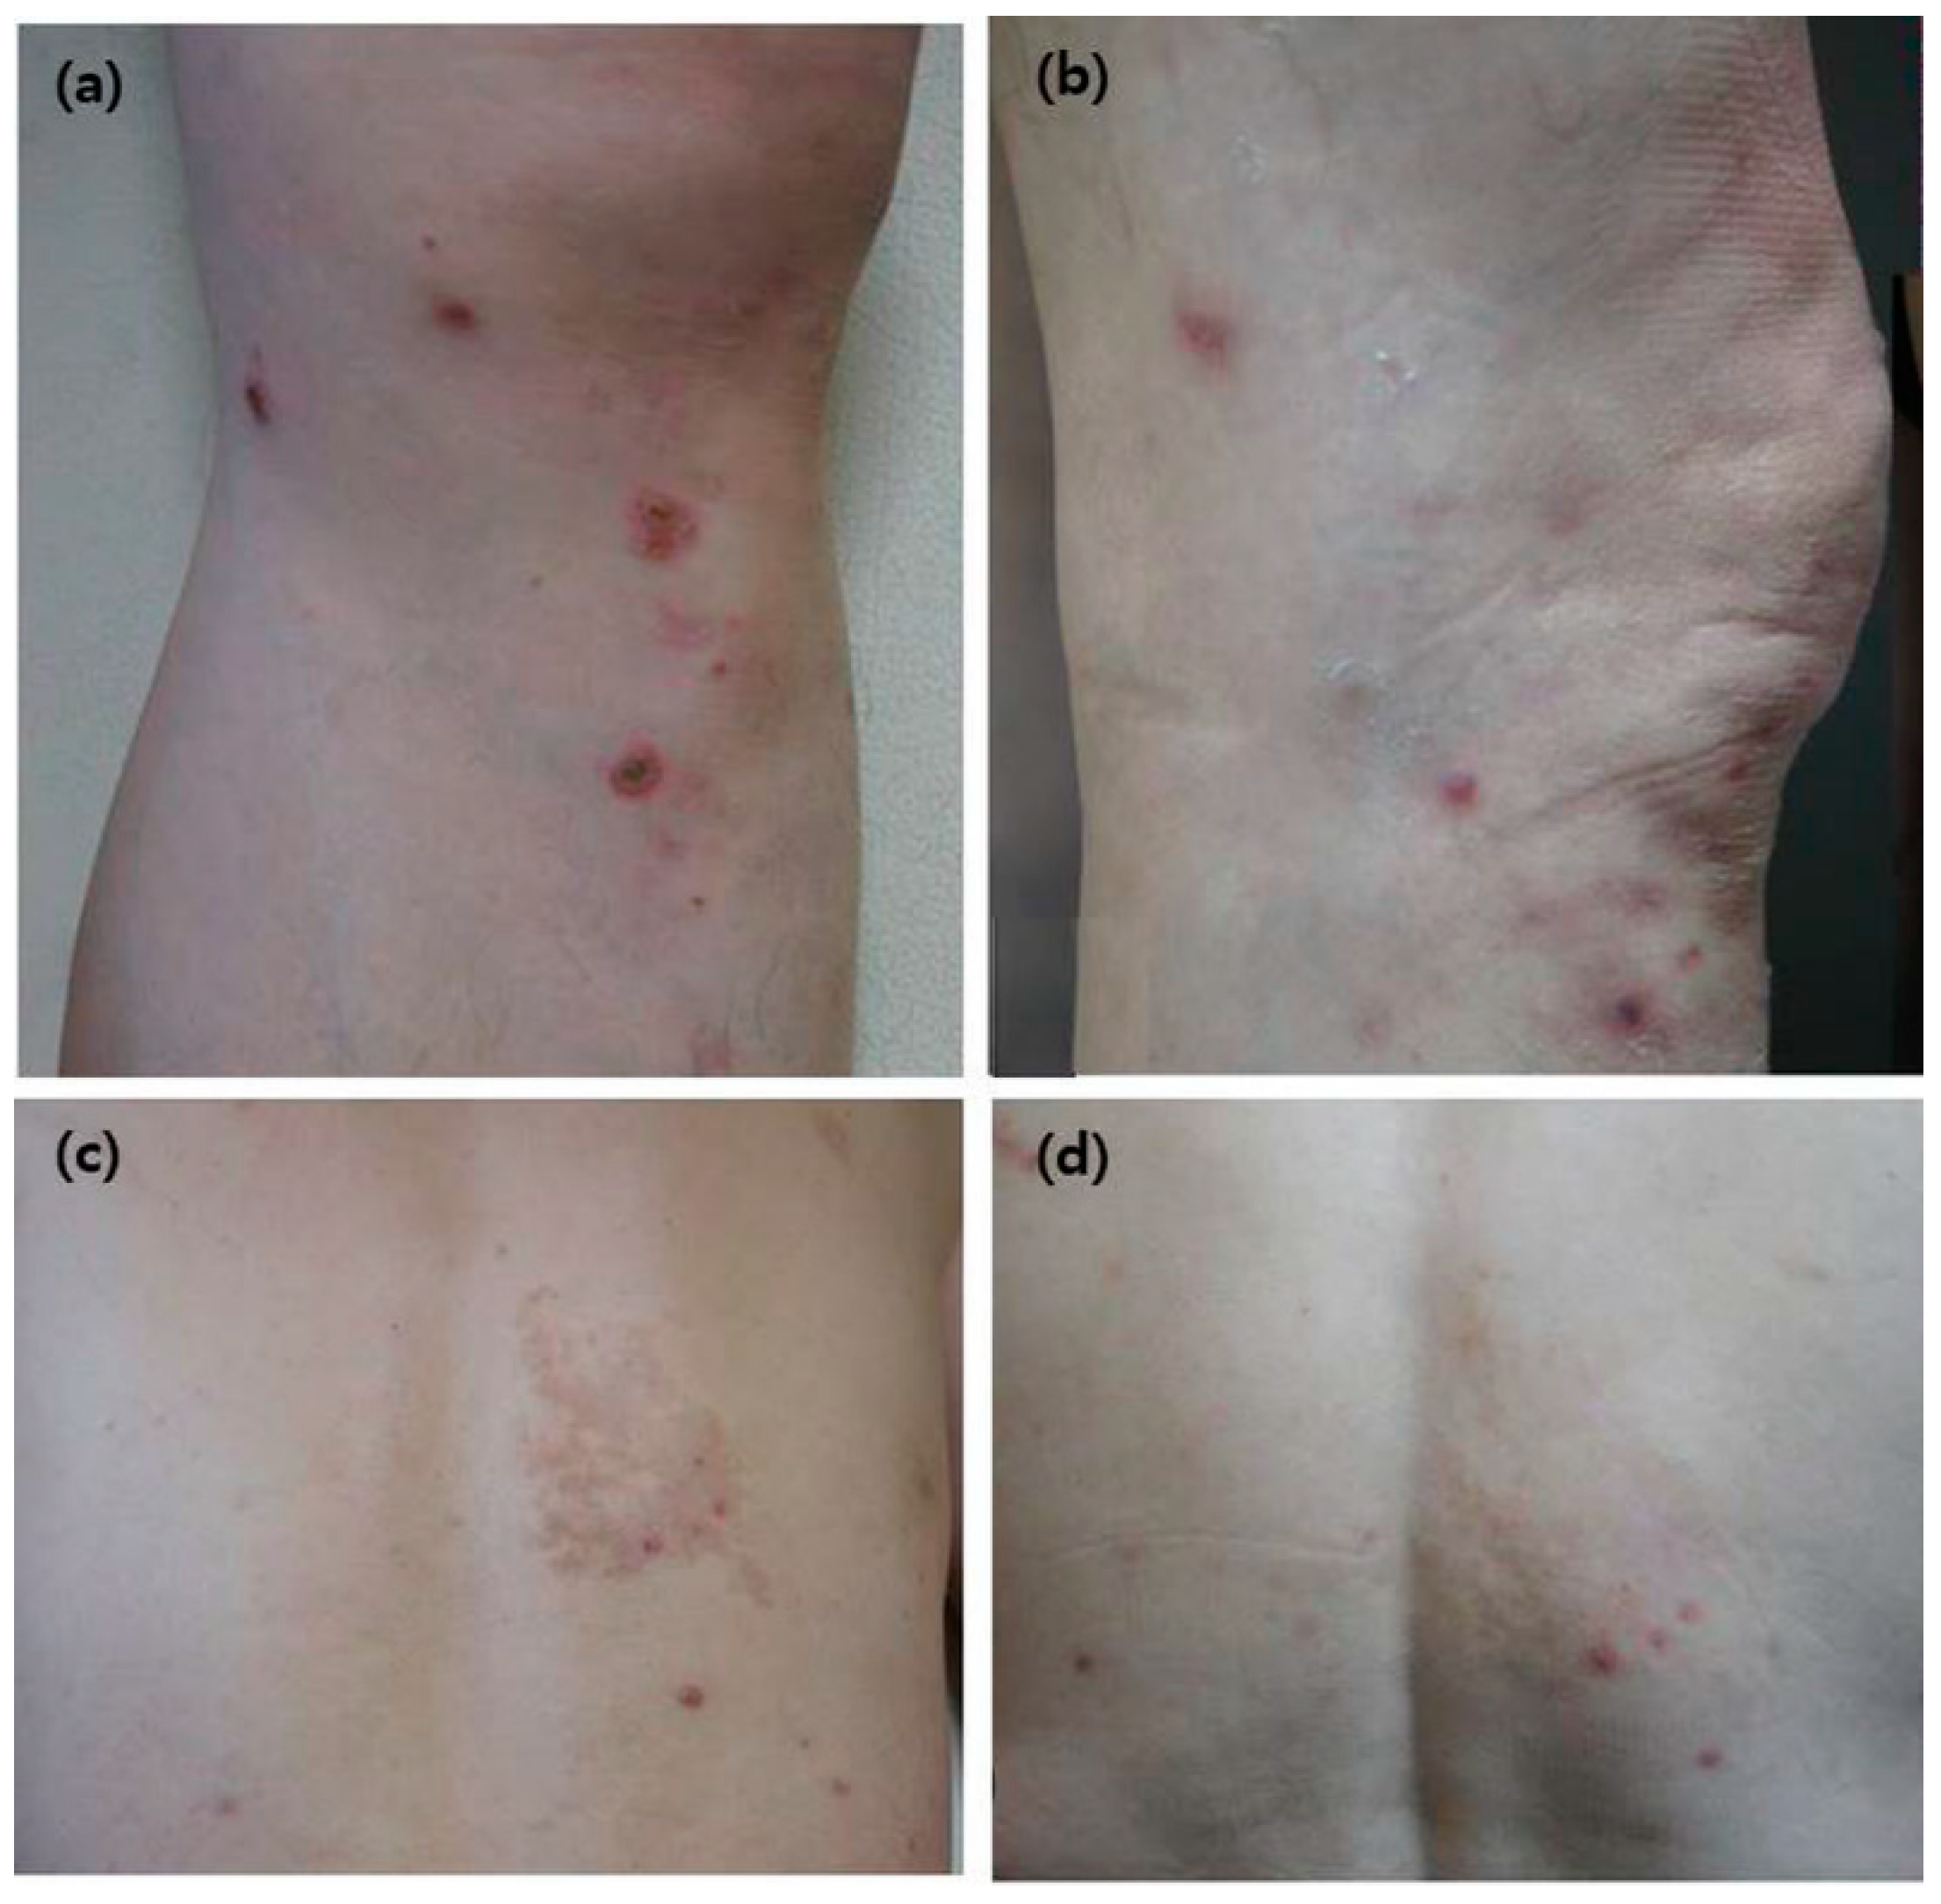 Clinical picture of Case 2 showing an erythematous scaly skin rash